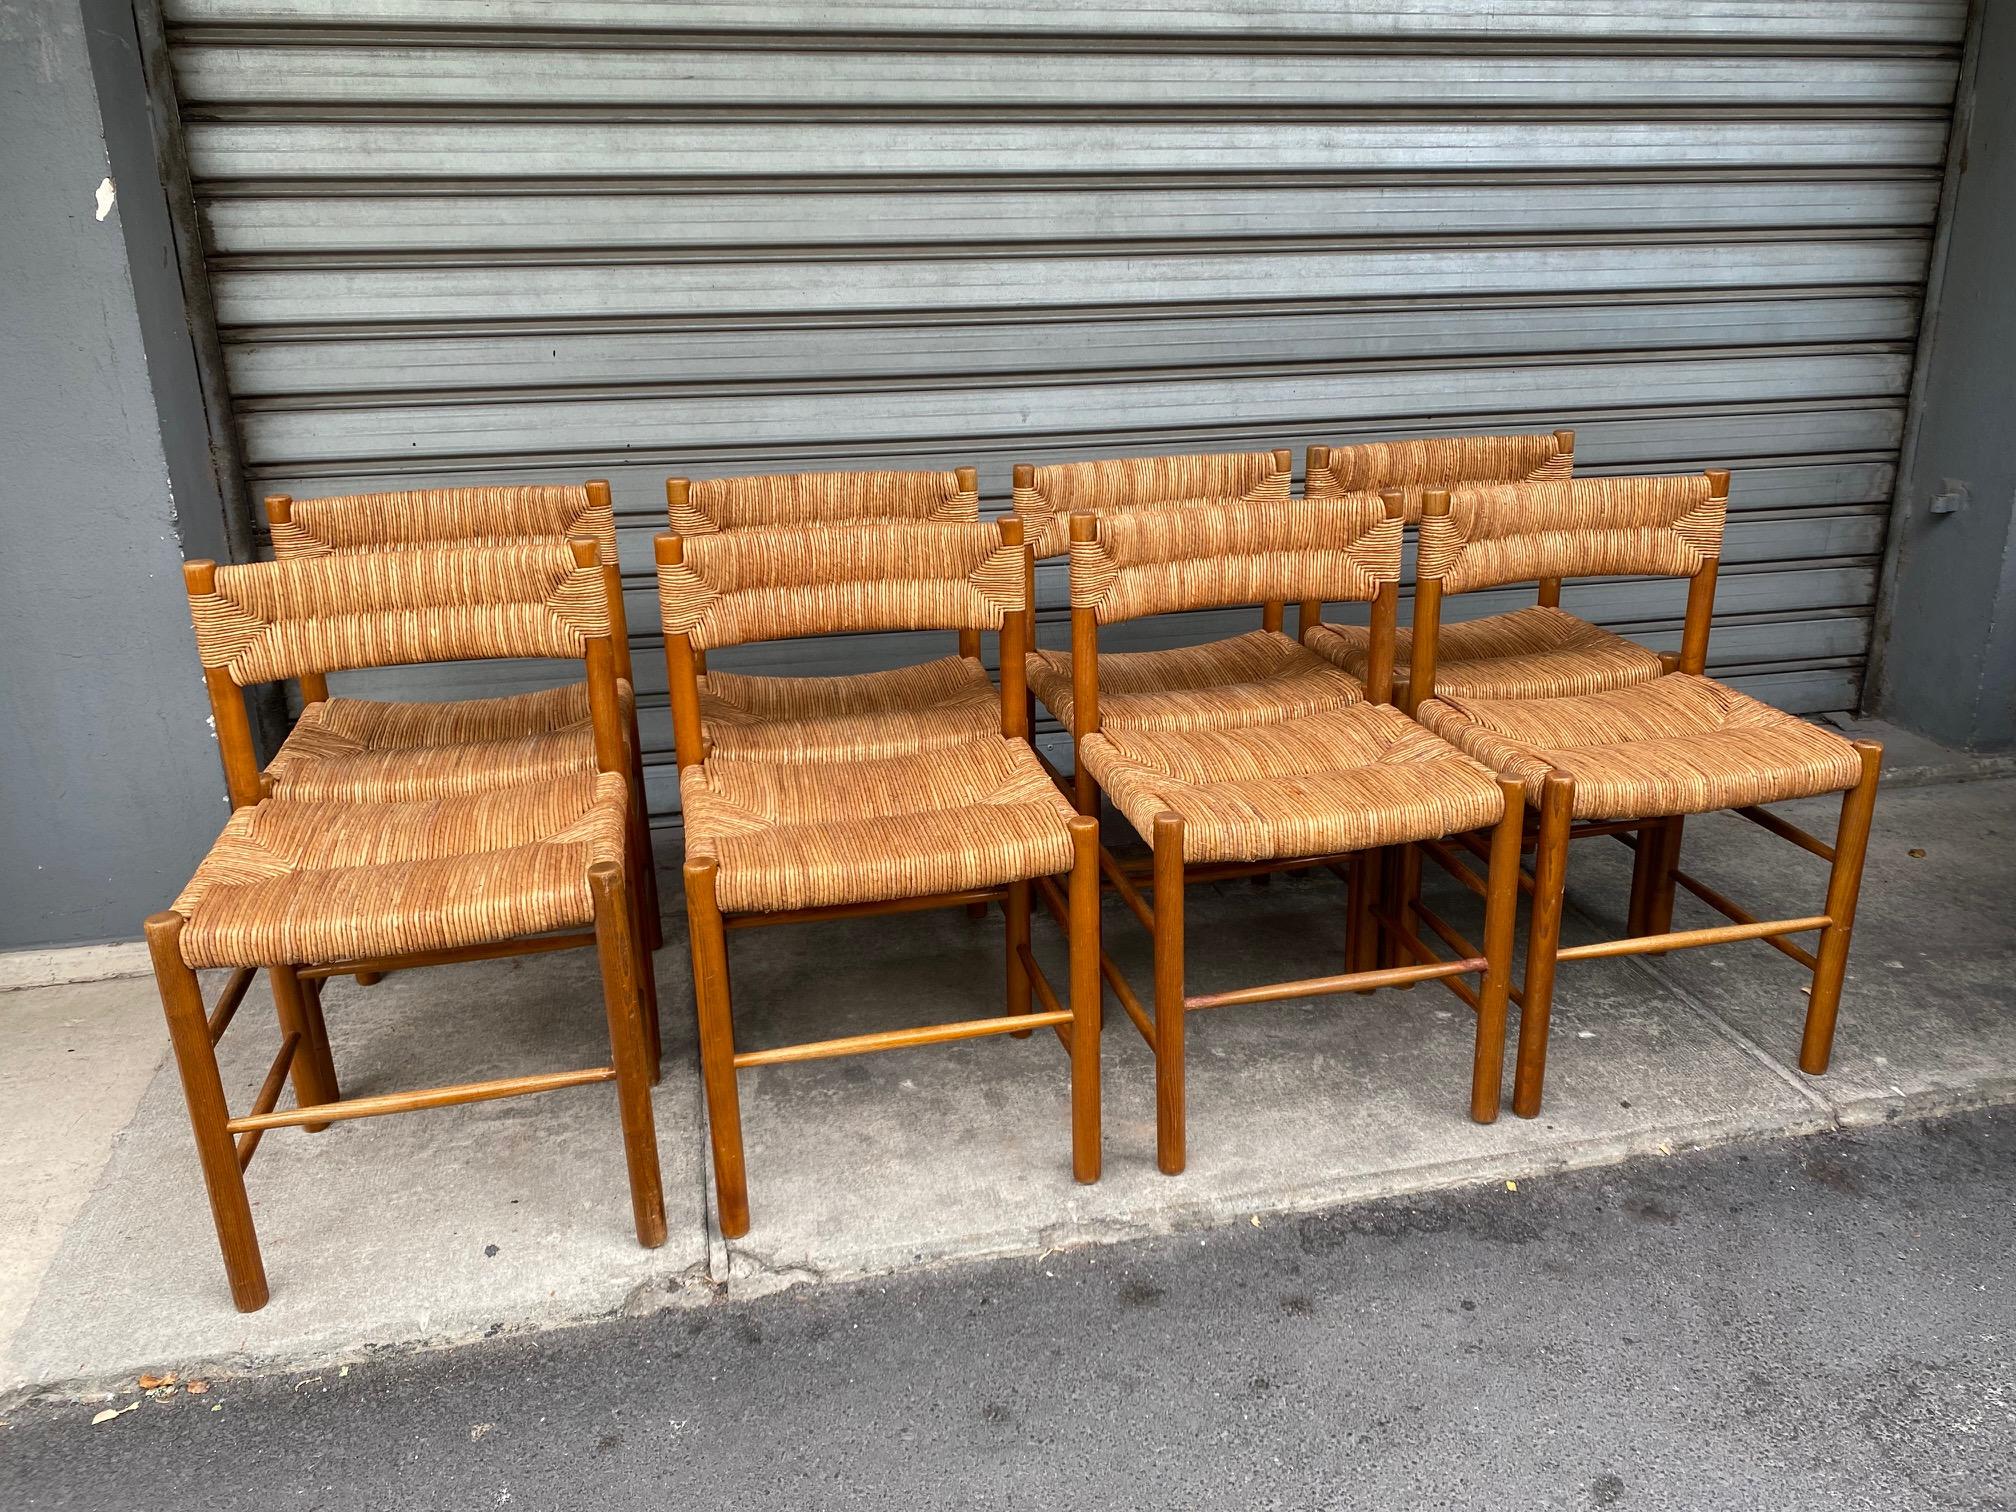 20th Century Set of 8 Dordogne chairs by Charlotte Perriand, France, 1960s For Sale